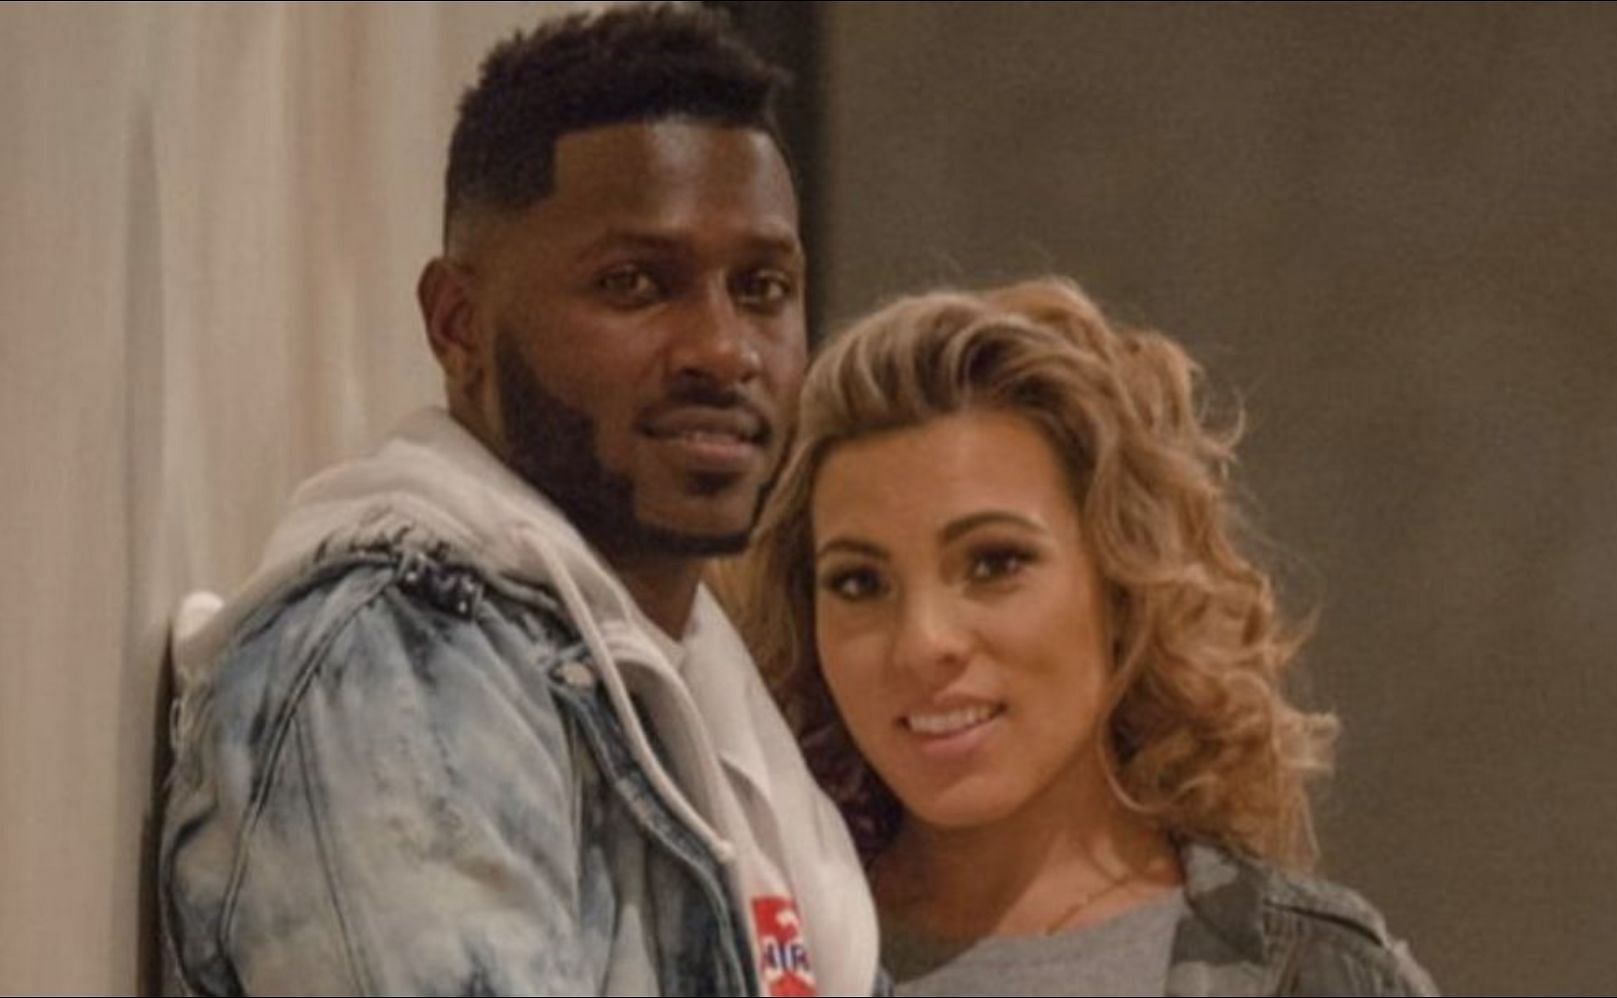 Former NFL WR Antonio Brown with Chelsie Kyriss, the mother of his children